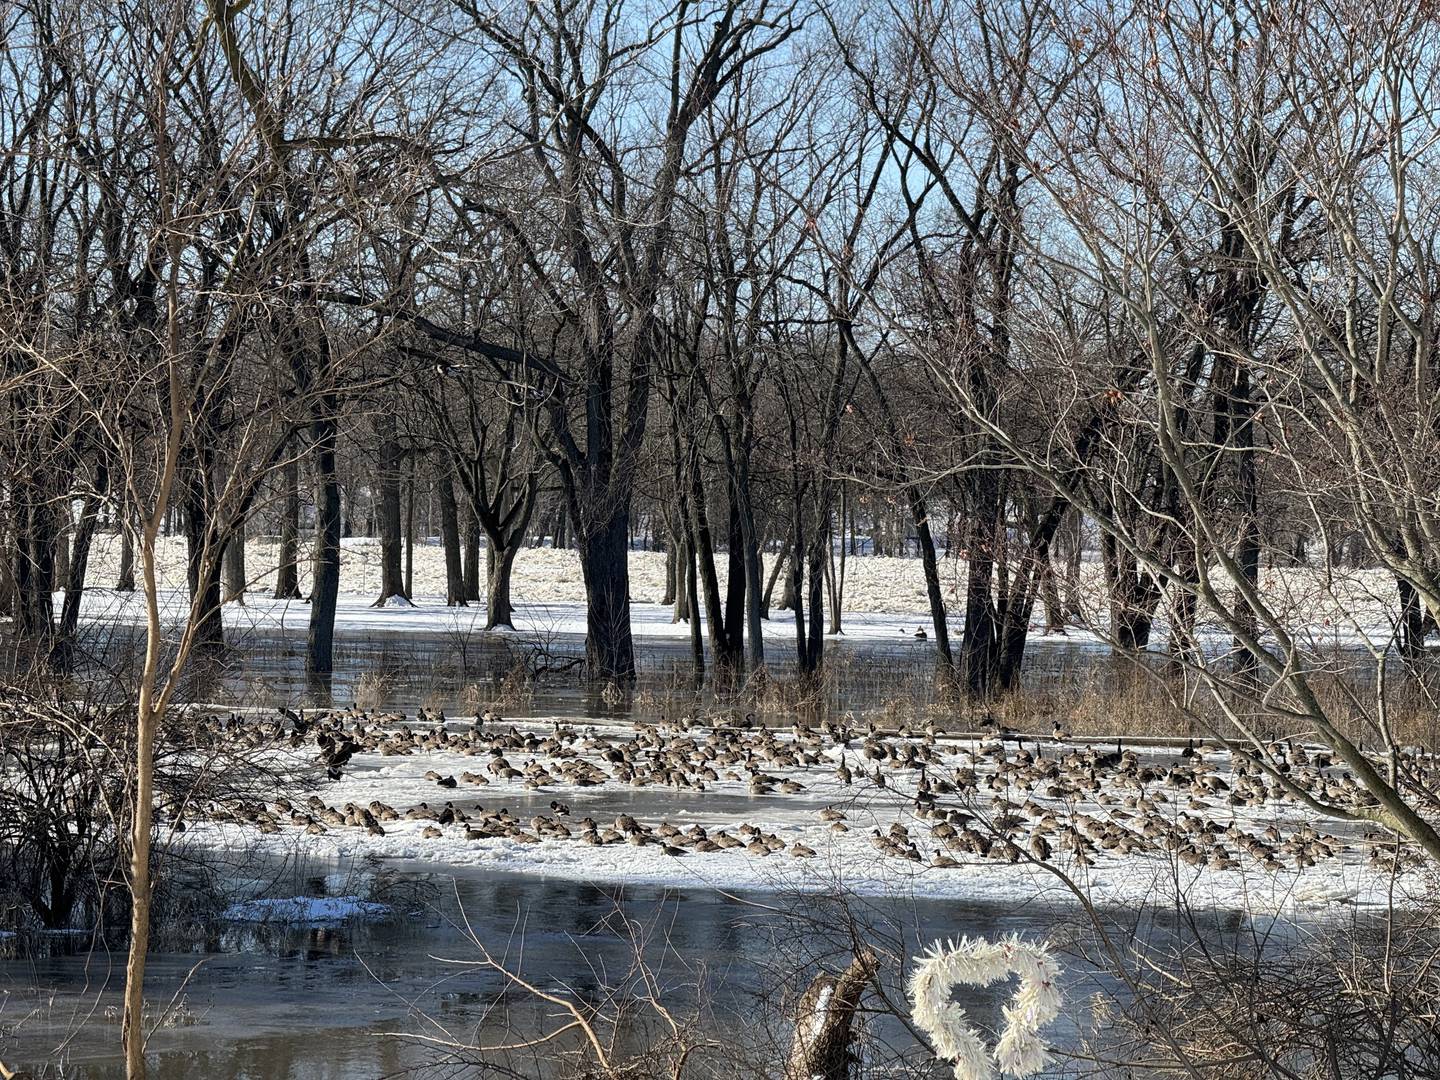 Geese camp out on ice along the Kankakee River in Wilmington near Kankakee River State Park on Wednesday, Jan. 17, 2023.  The Will County Emergency Management Agency and National Weather Service issued flood warnings to residents in the area this week.